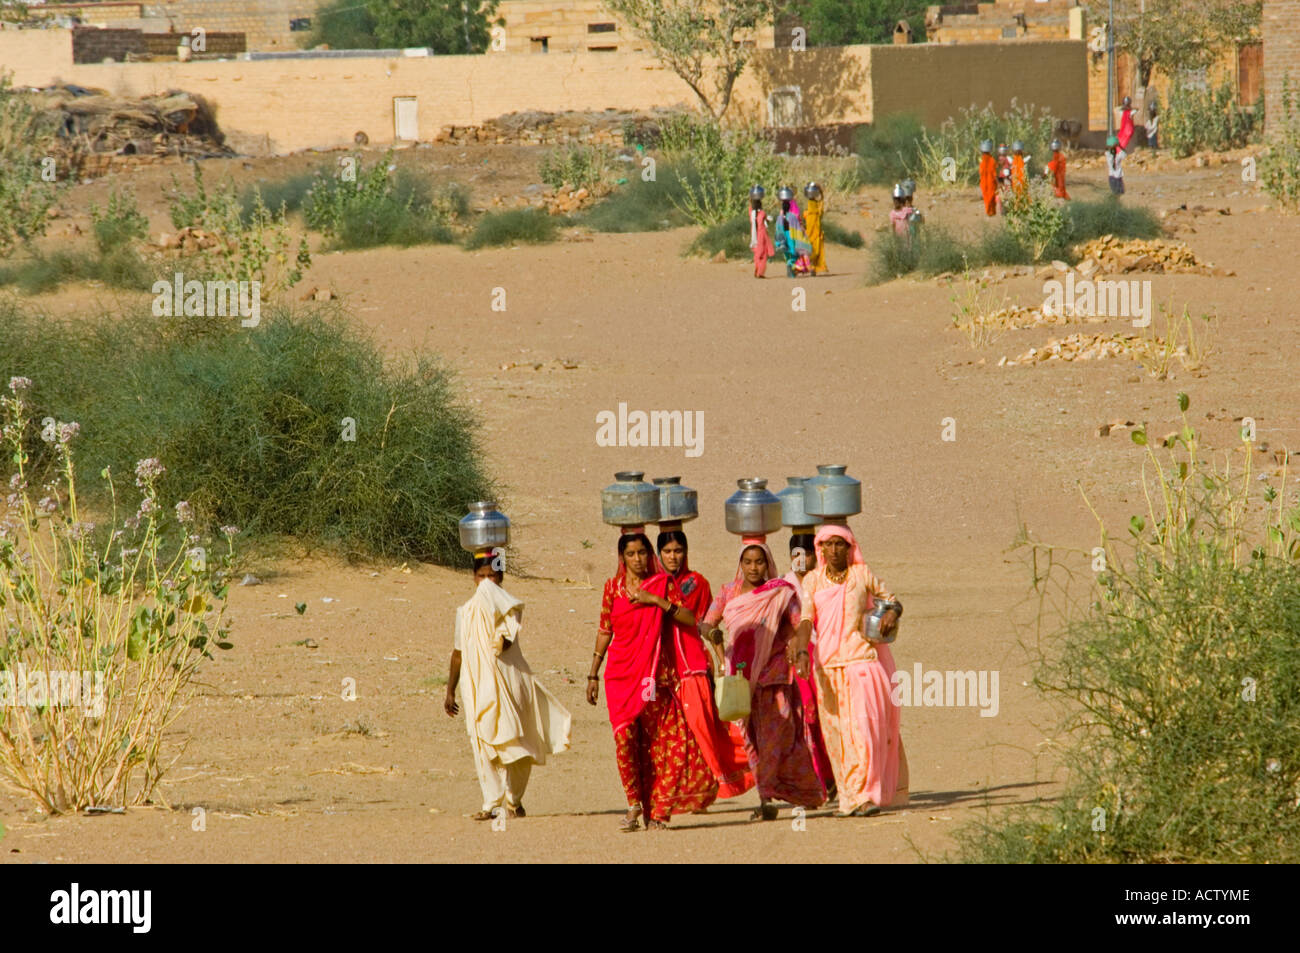 A group of Rajasthani village women collecting water 1 km from their village in the Thar desert about 40km from Jaisalmer. Stock Photo